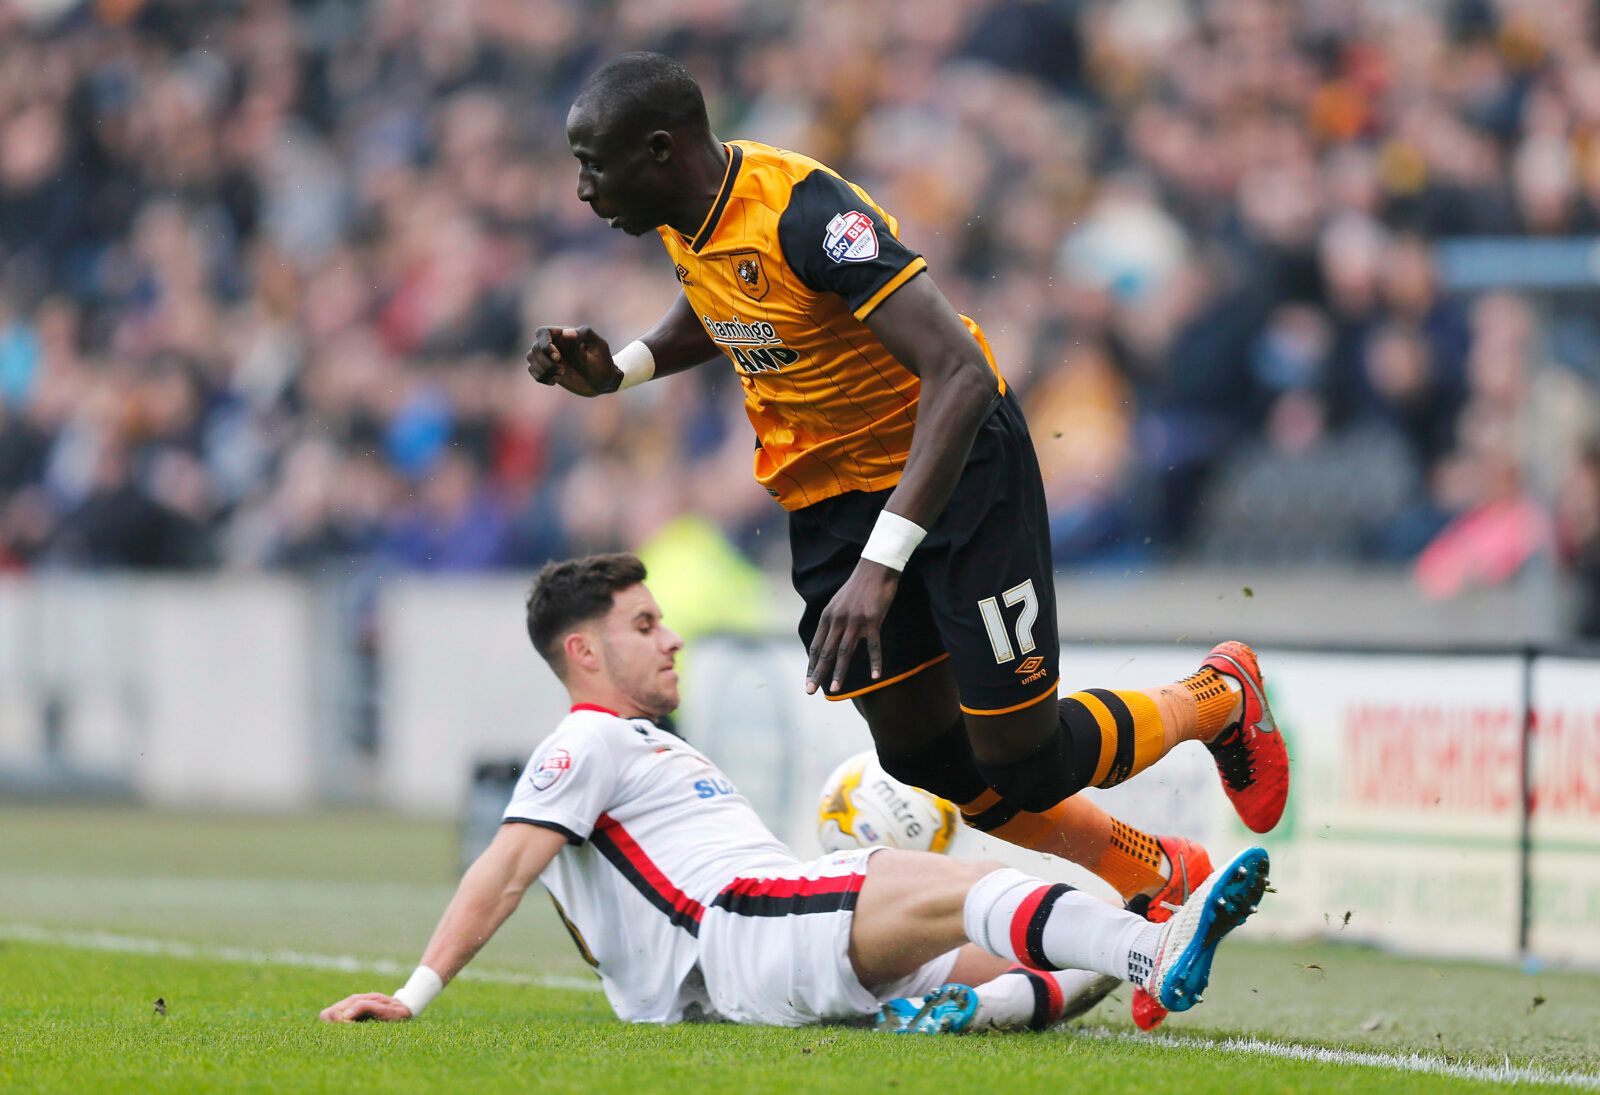 Football Soccer - Hull City v Milton Keynes Dons - Sky Bet Football League Championship - The Kingston Communications Stadium - 12/3/16 
Mohamed Diame of Hull City in action with George Baldock of Milton Keynes Dons  
Mandatory Credit: Action Images / John Clifton 
Livepic 
EDITORIAL USE ONLY. No use with unauthorized audio, video, data, fixture lists, club/league logos or 